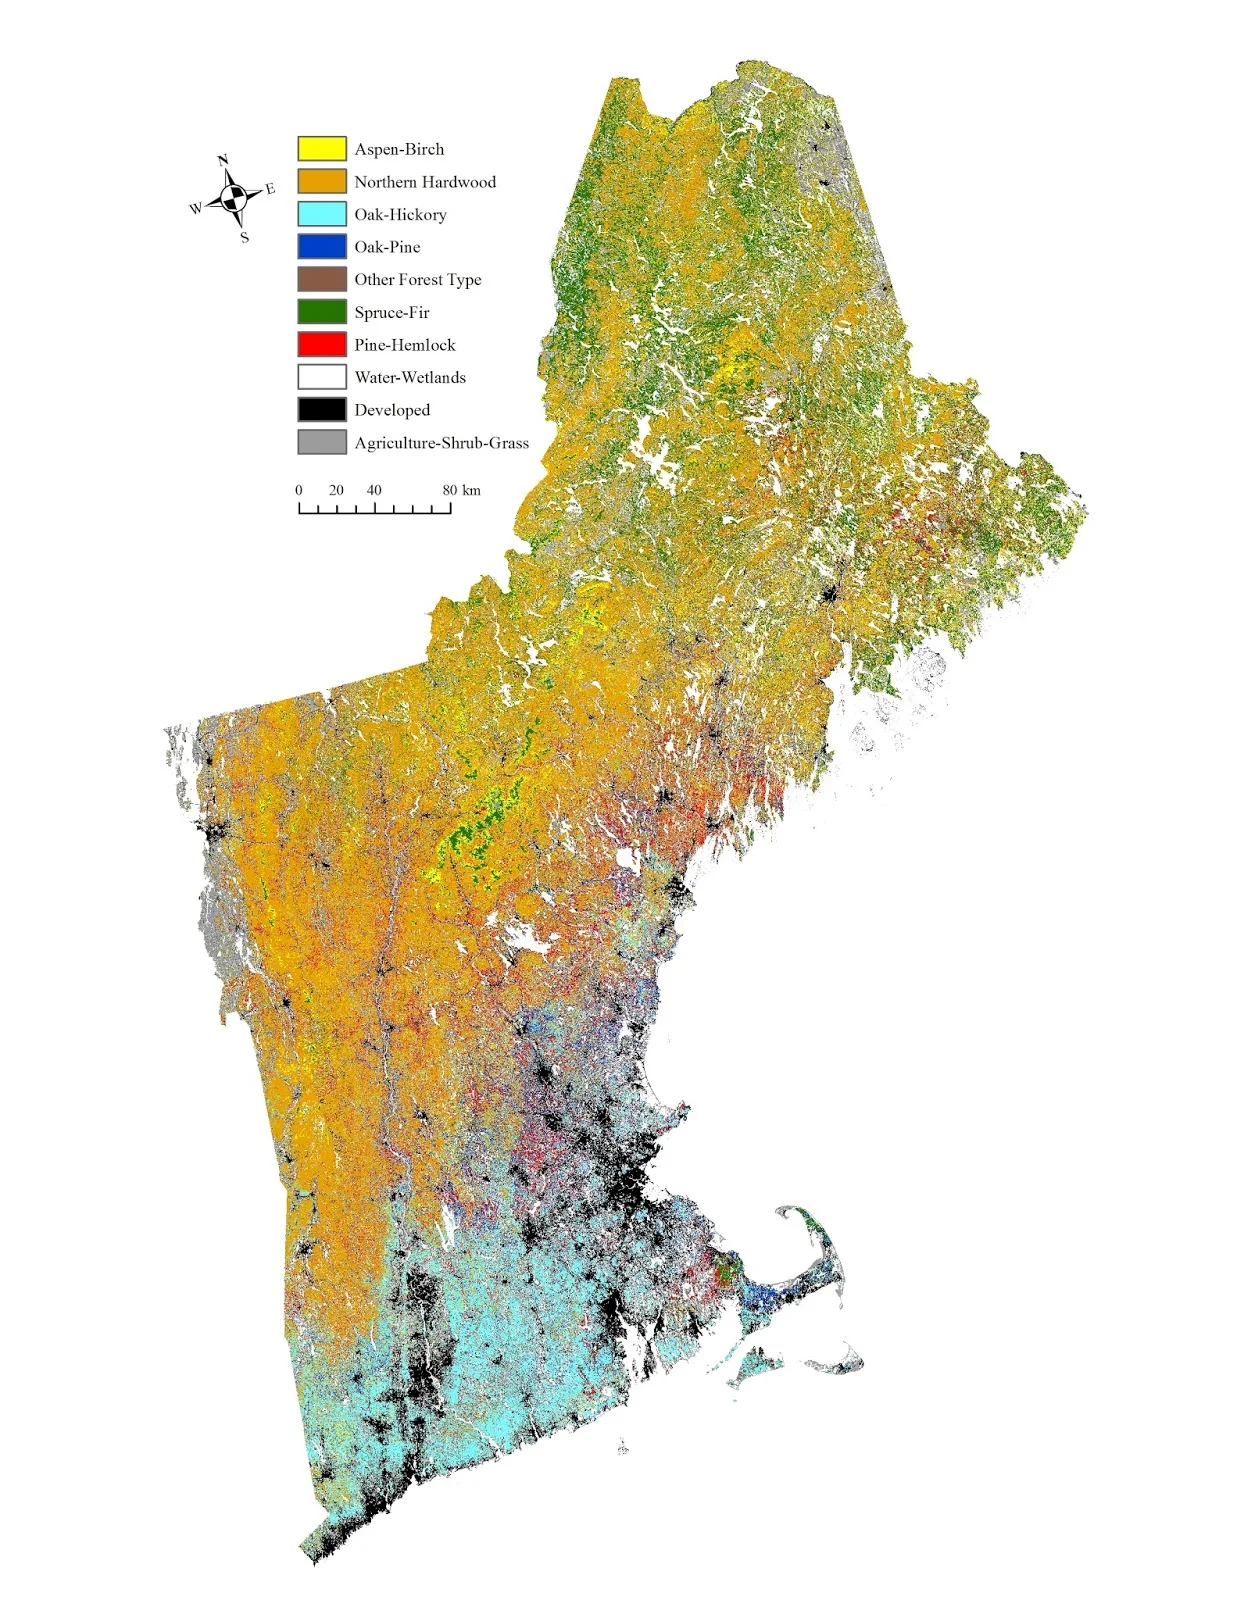 Forest types of New England